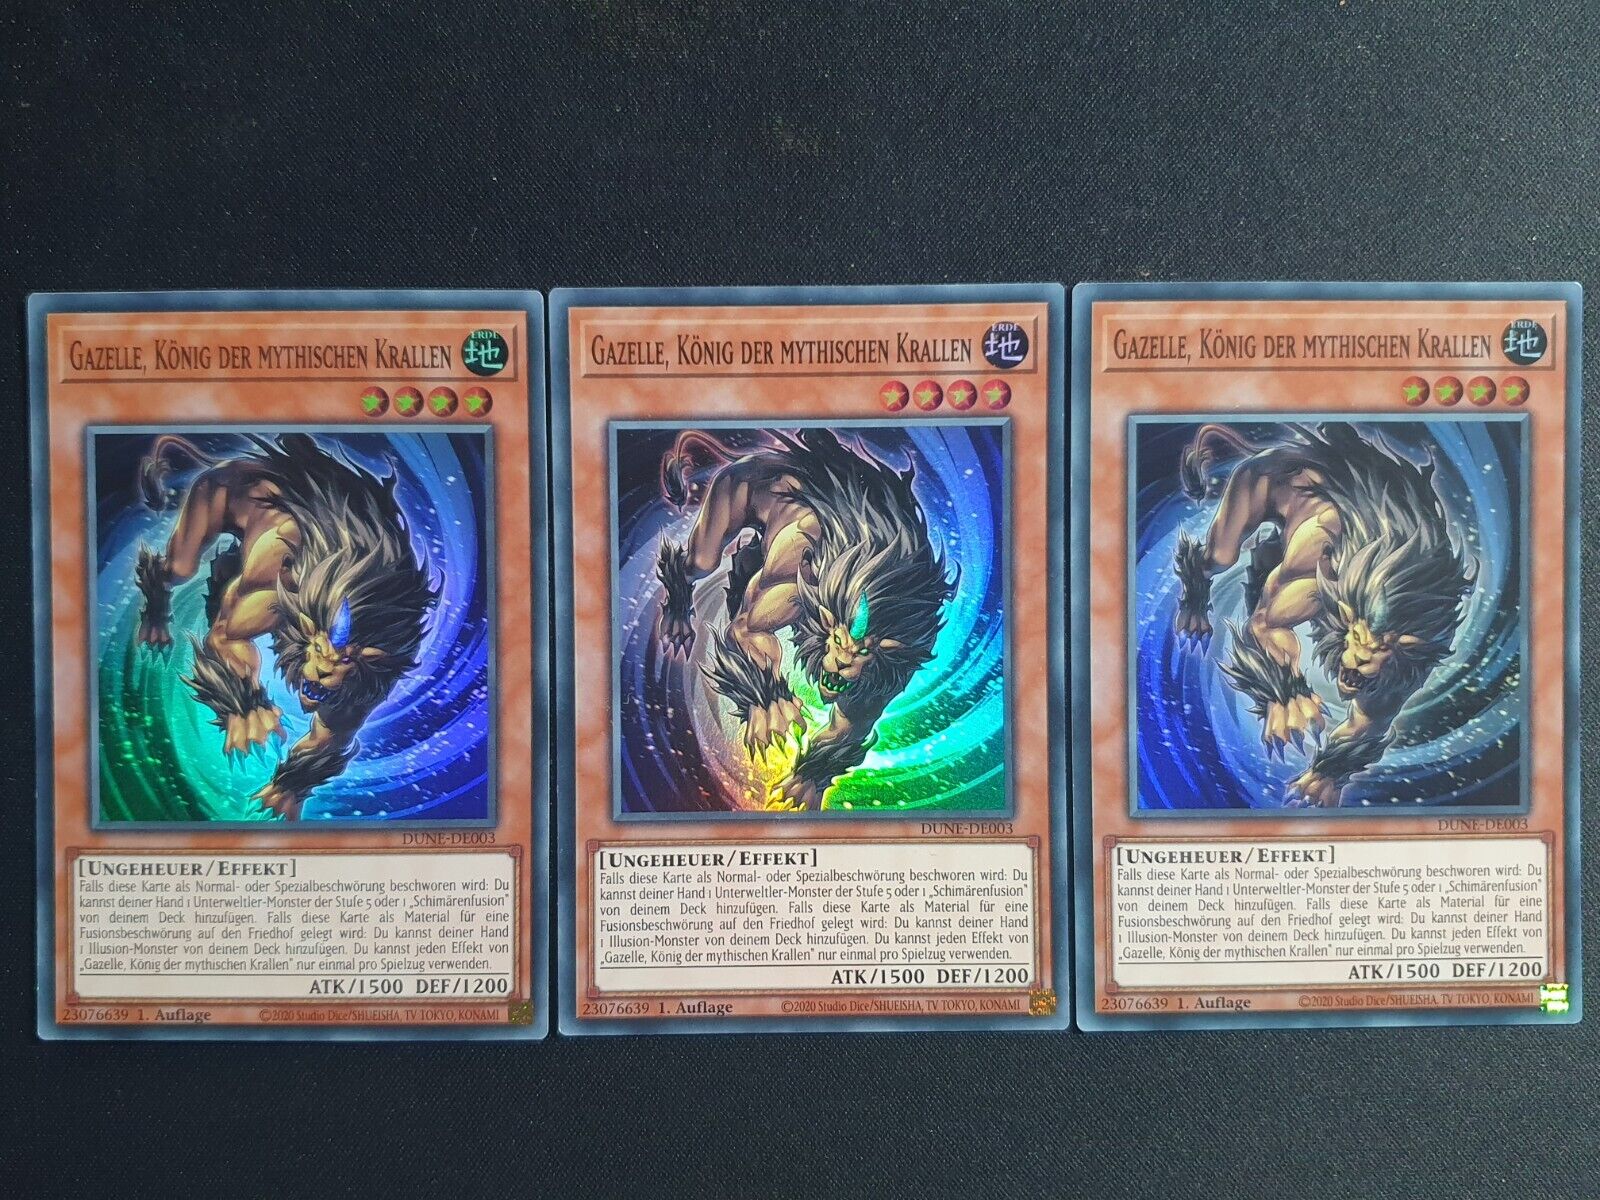 3x Yu-Gi-Oh DUNE-DE003 Gazelle King of Mythical Claws Super Rare NM 1st